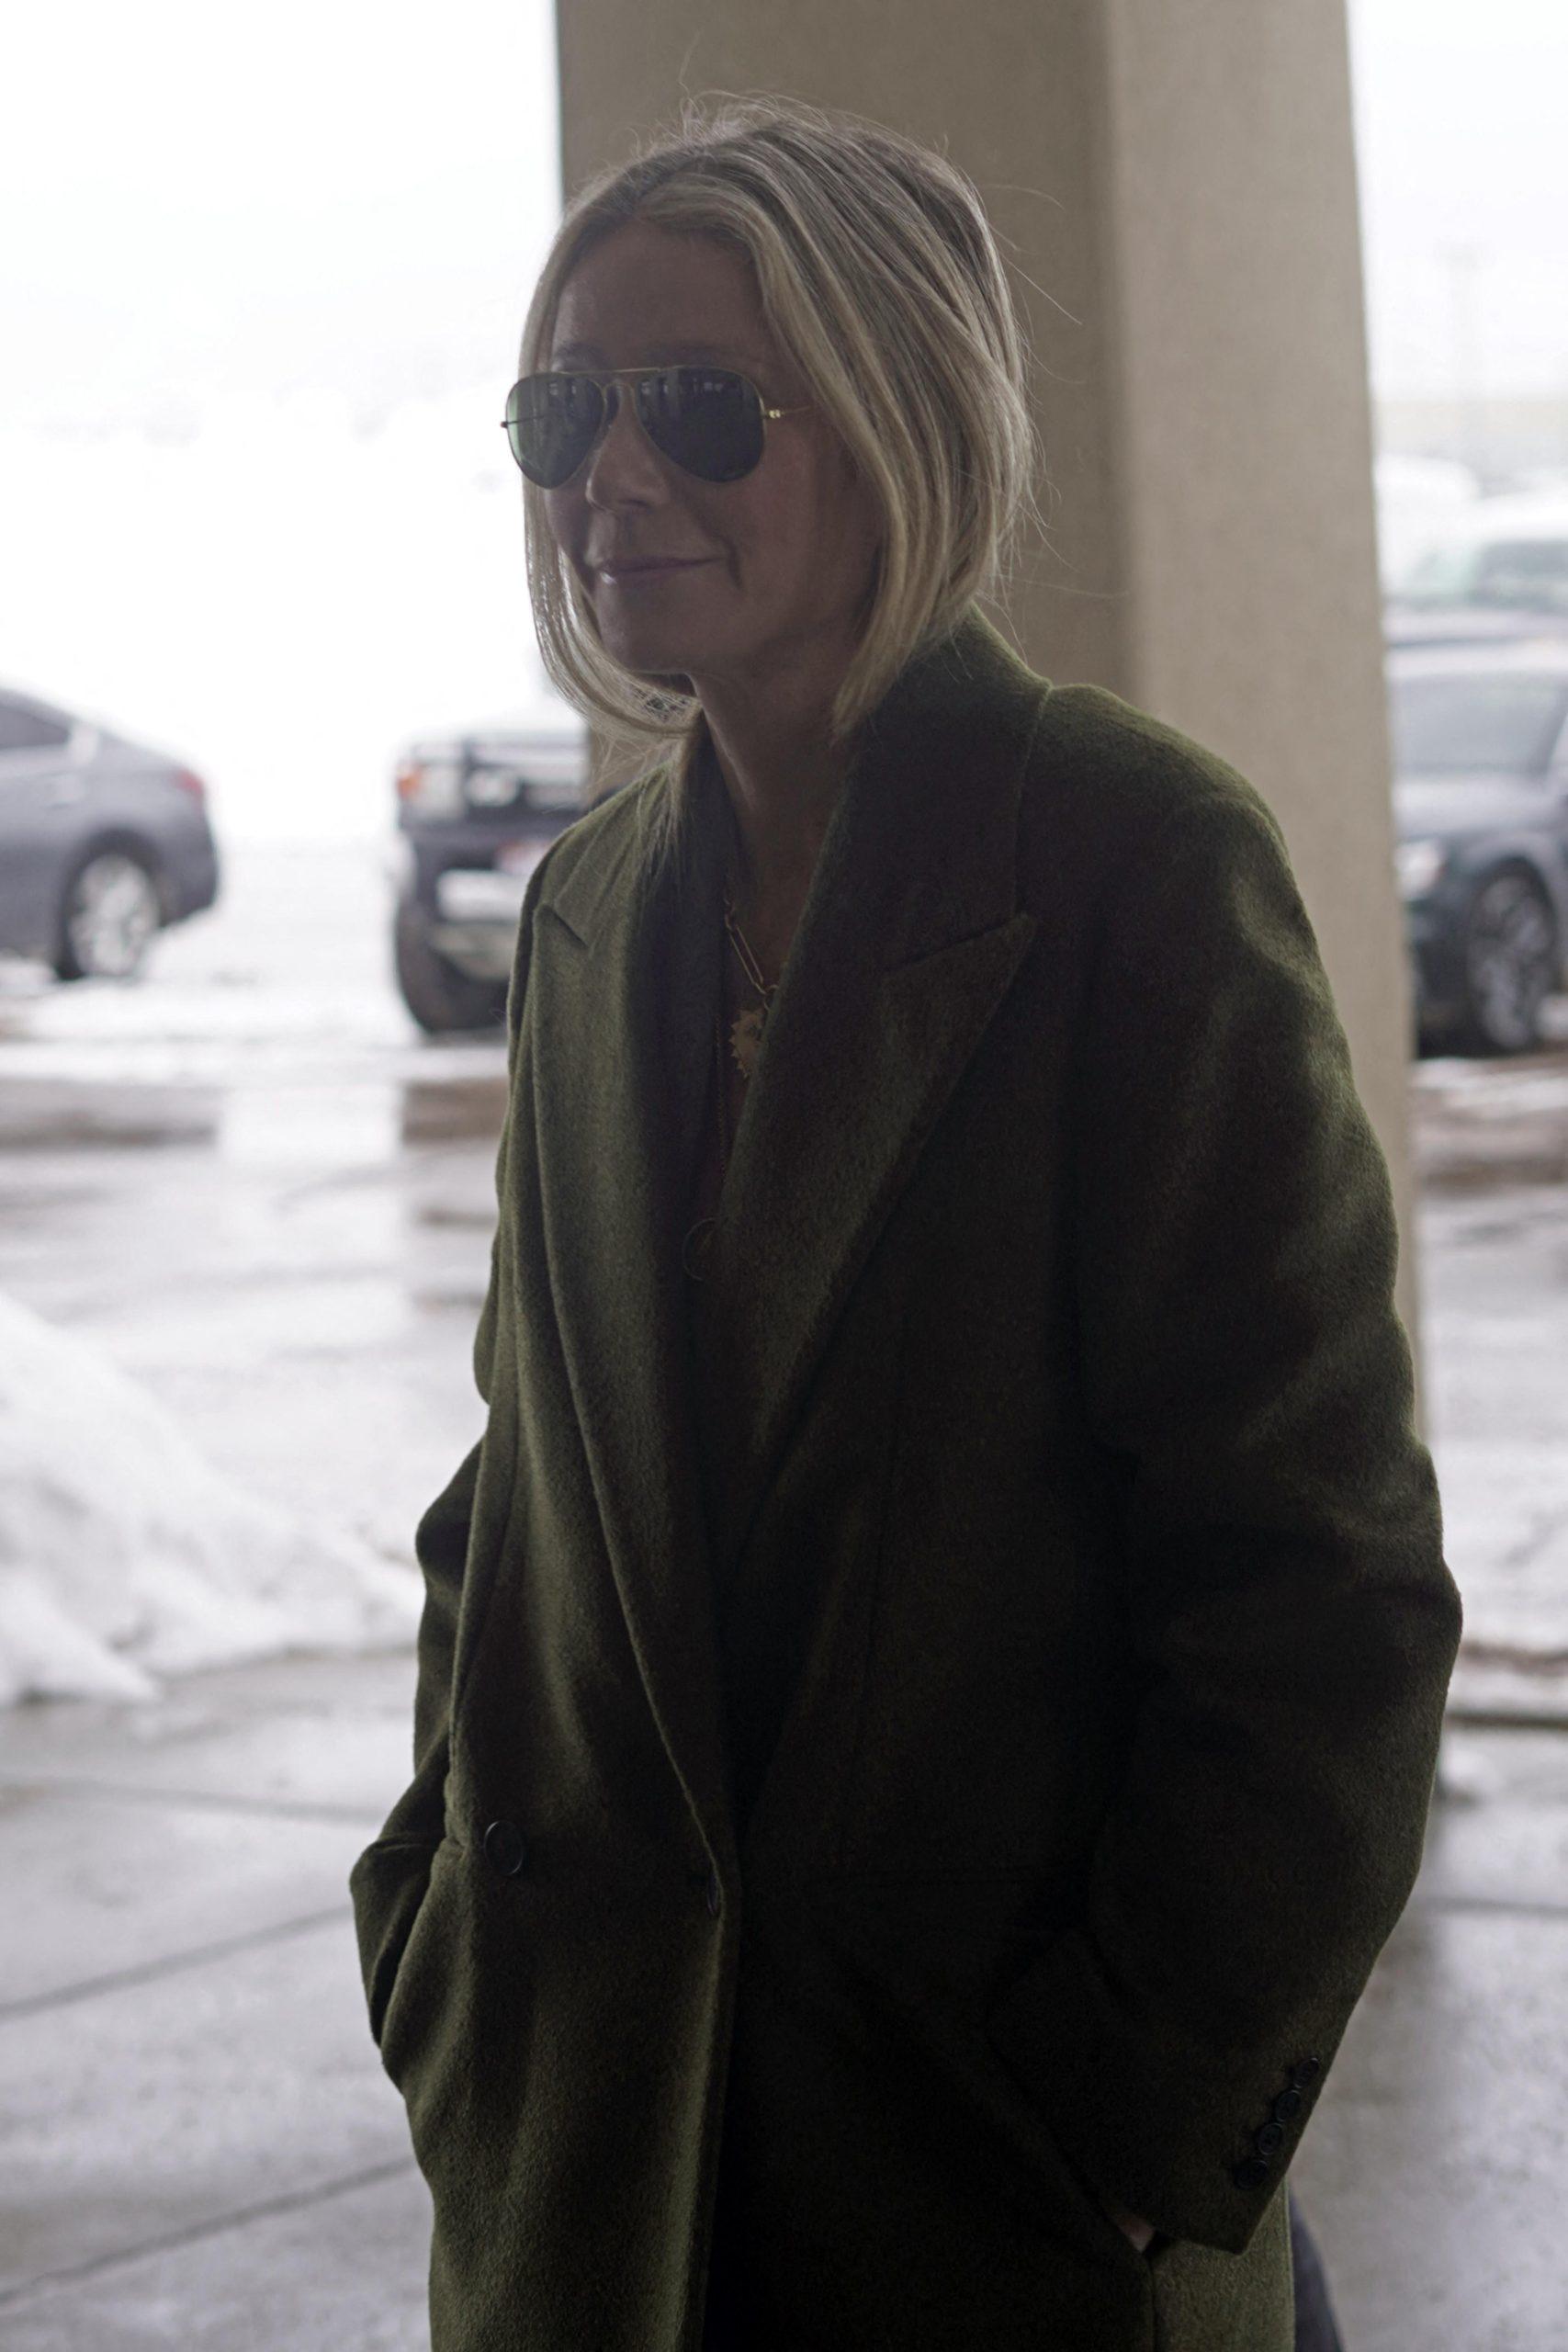 Gwyneth Paltrow is seen arriving at court for the 3rd day Paltrow is being sued for a ski crash in 2016